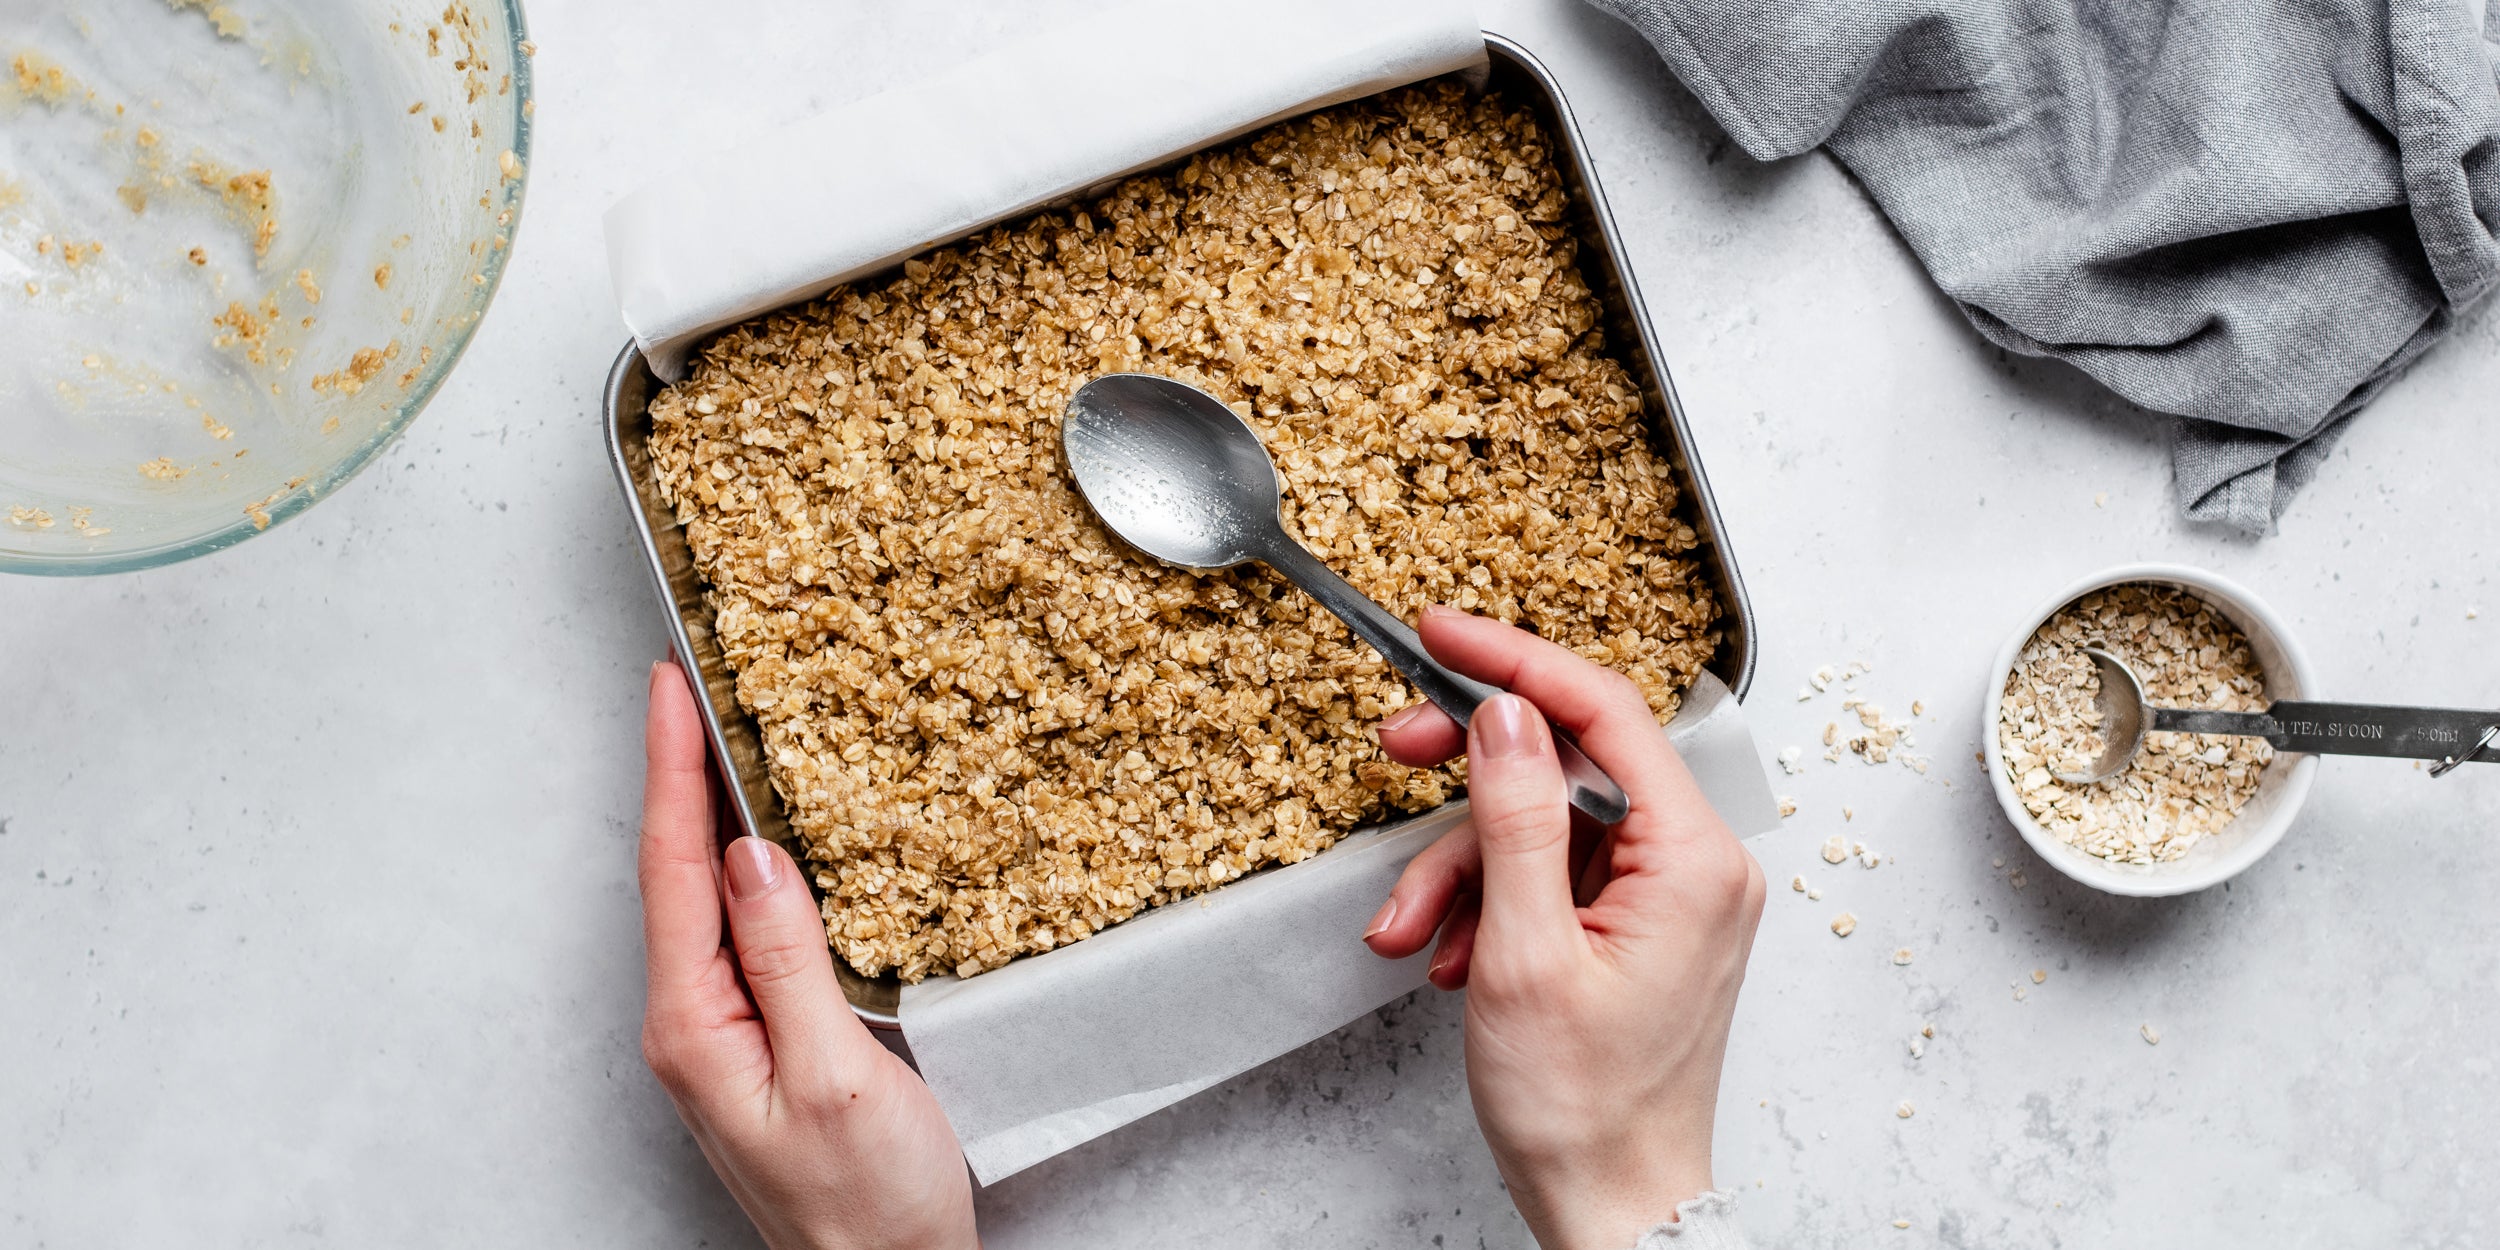 Easy Flapjack mix being pressed into a lined baking tray, with a hand holding a spoon, next to a ramekin of oats 